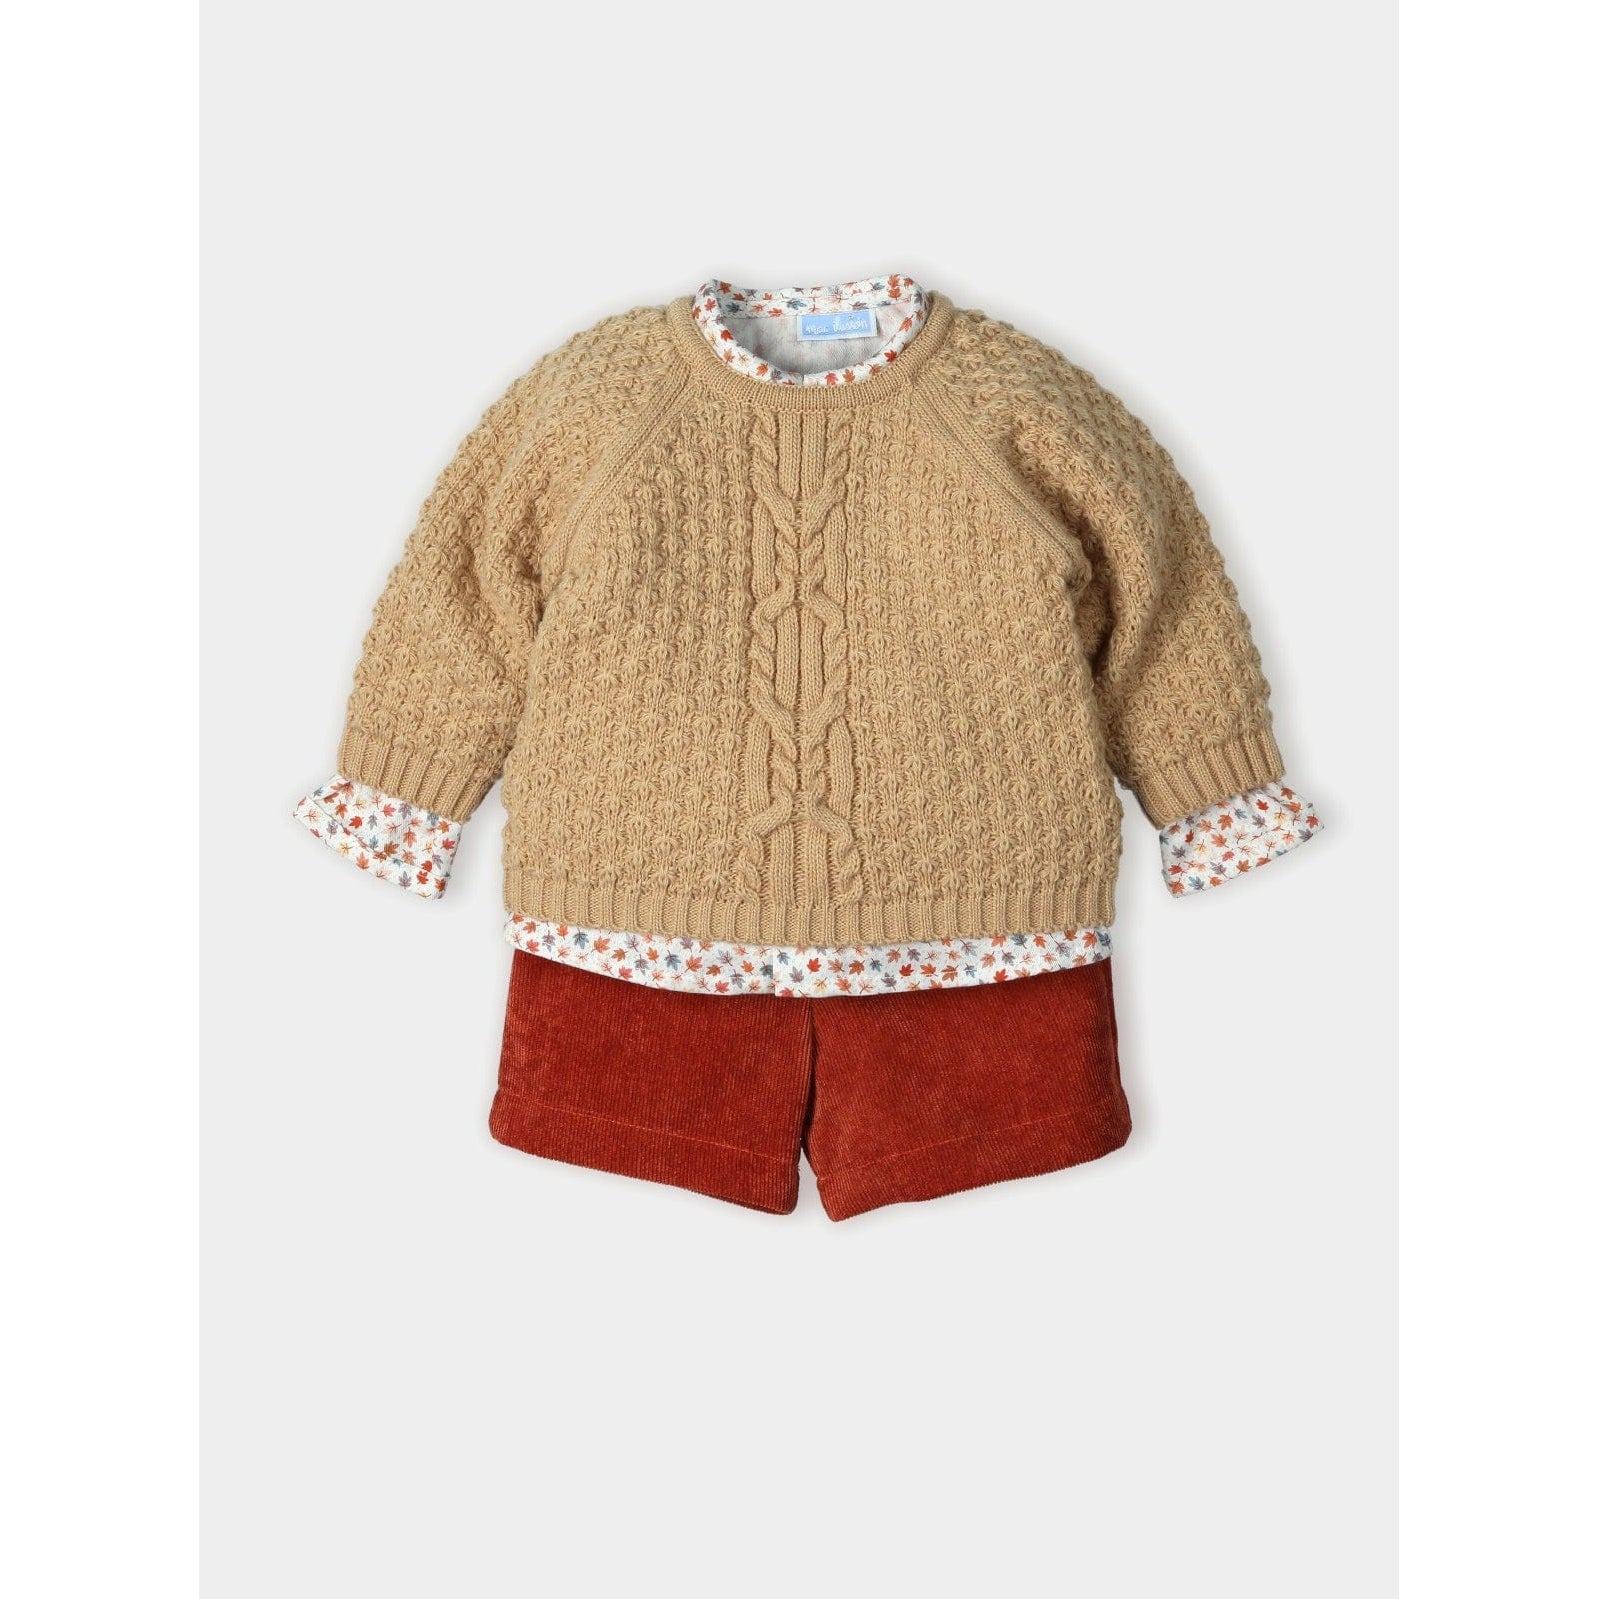 Mac Ilusion Tops & Shorts 12m Mac Ilusion Baby Boys Almond Three Pieces Knitted Sweater Shirt & Corduroy Shorts Outfit